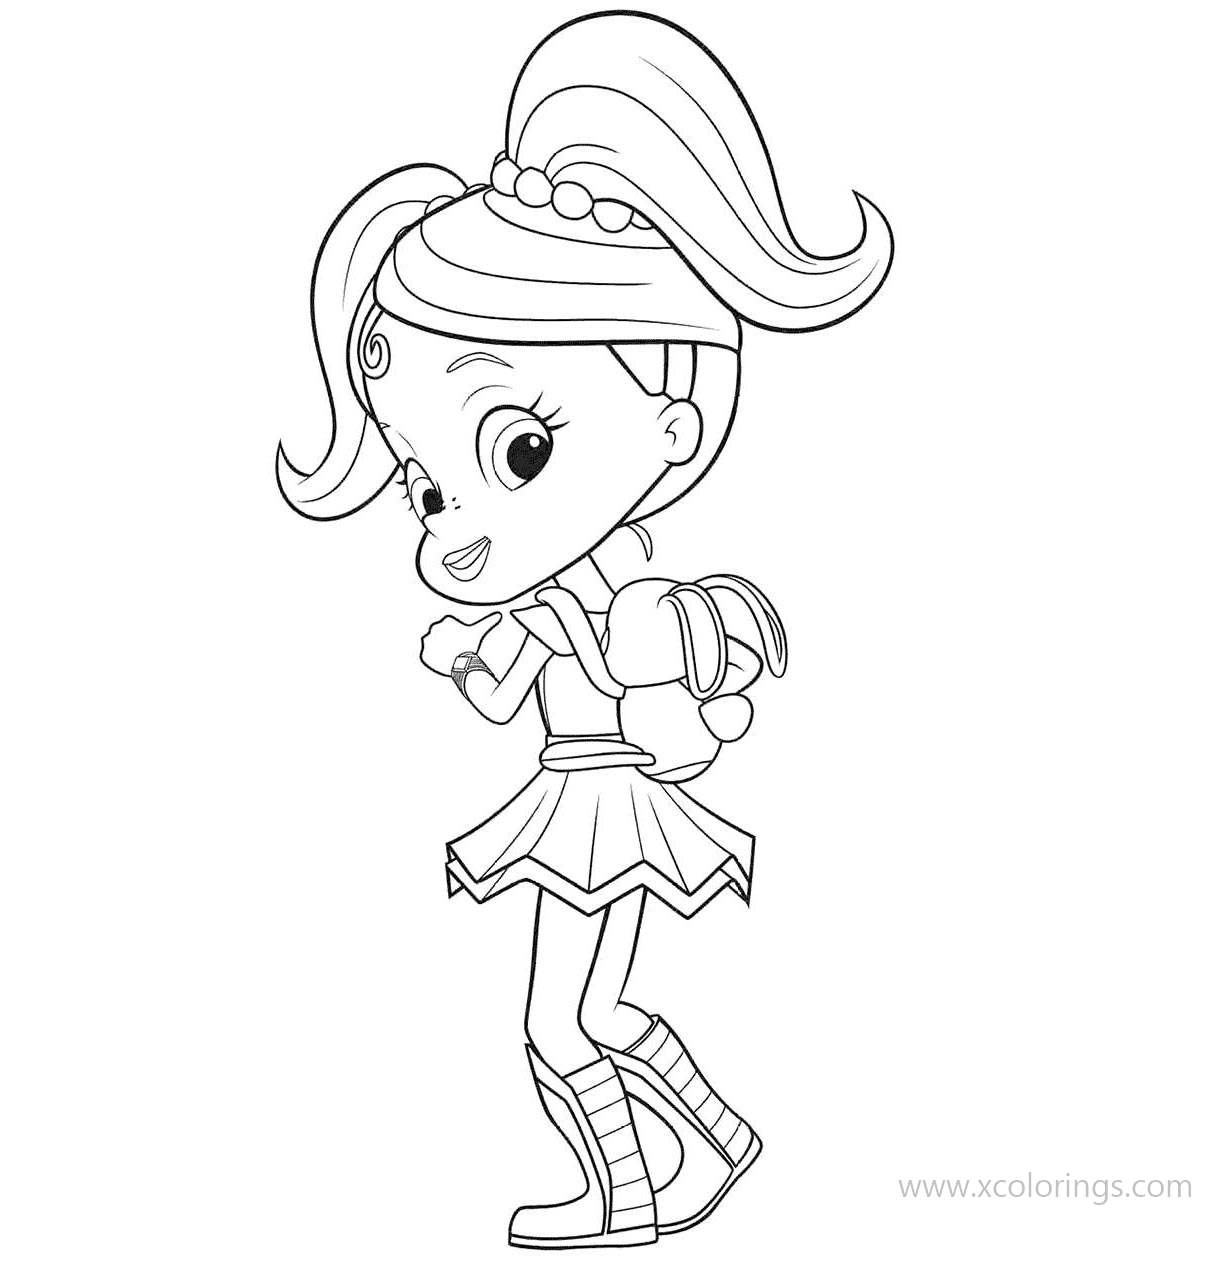 Rainbow Rangers Coloring Pages Anna Banana with Backpack - XColorings.com